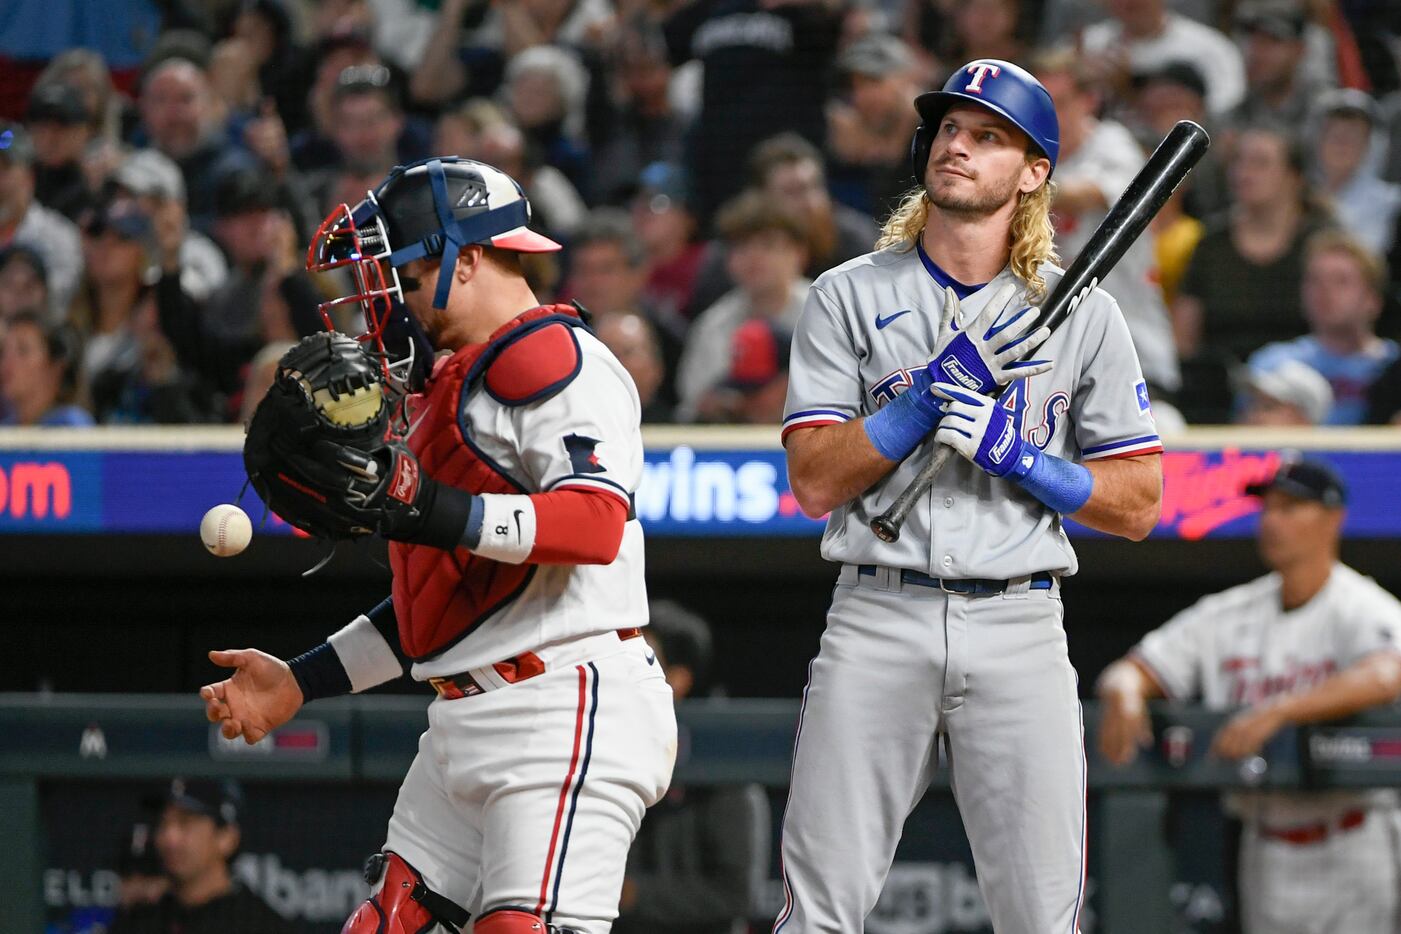 Statistically speaking, the Texas Rangers have the worst hitter in MLB